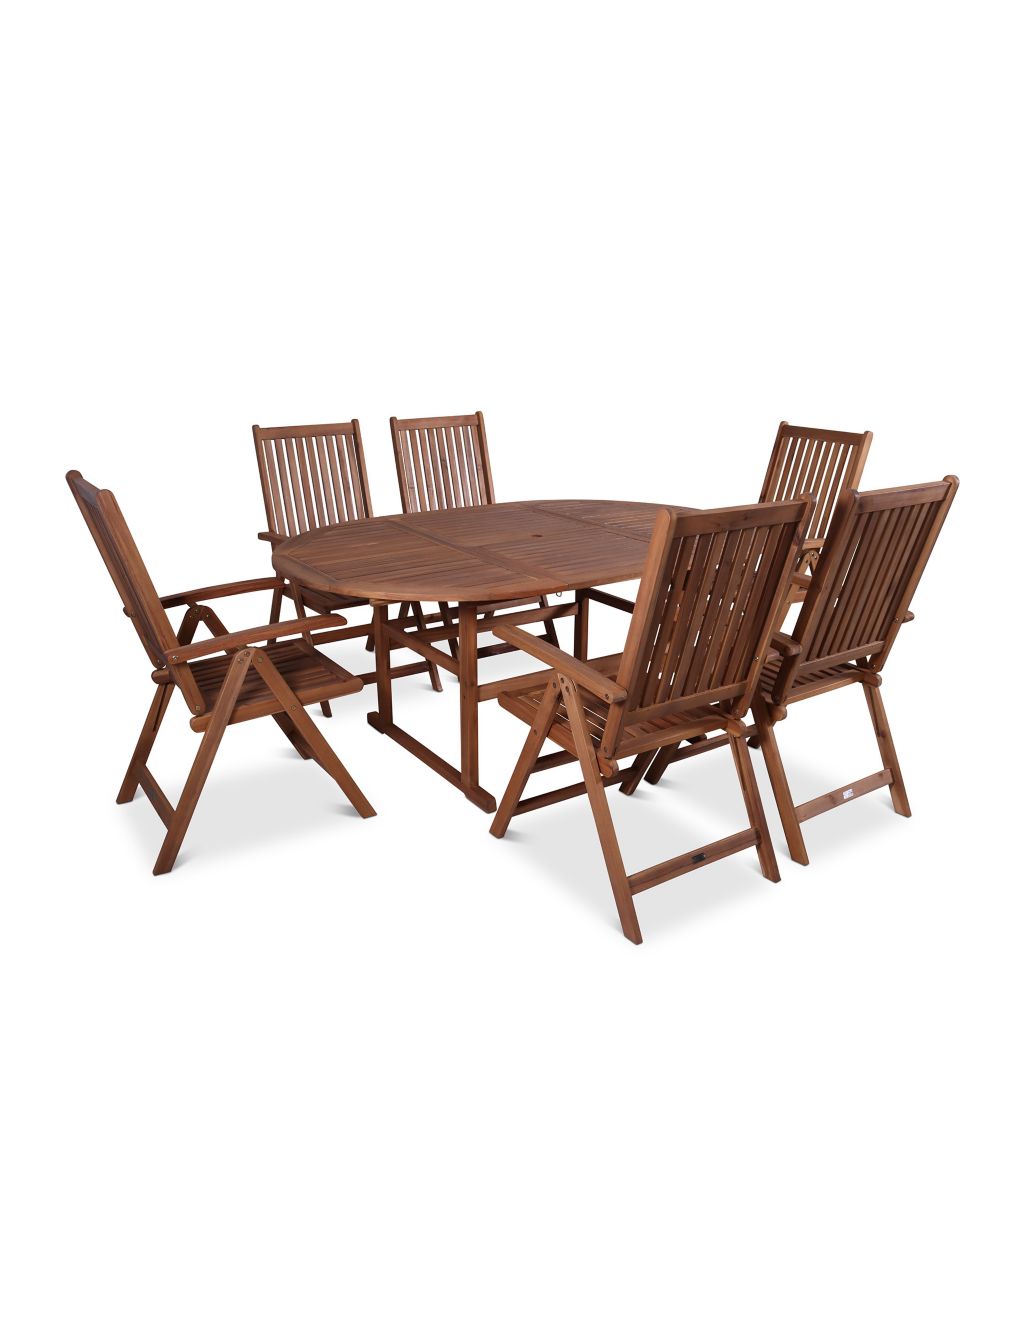 Turnbury 6 Seater Garden Table & Chairs 2 of 4